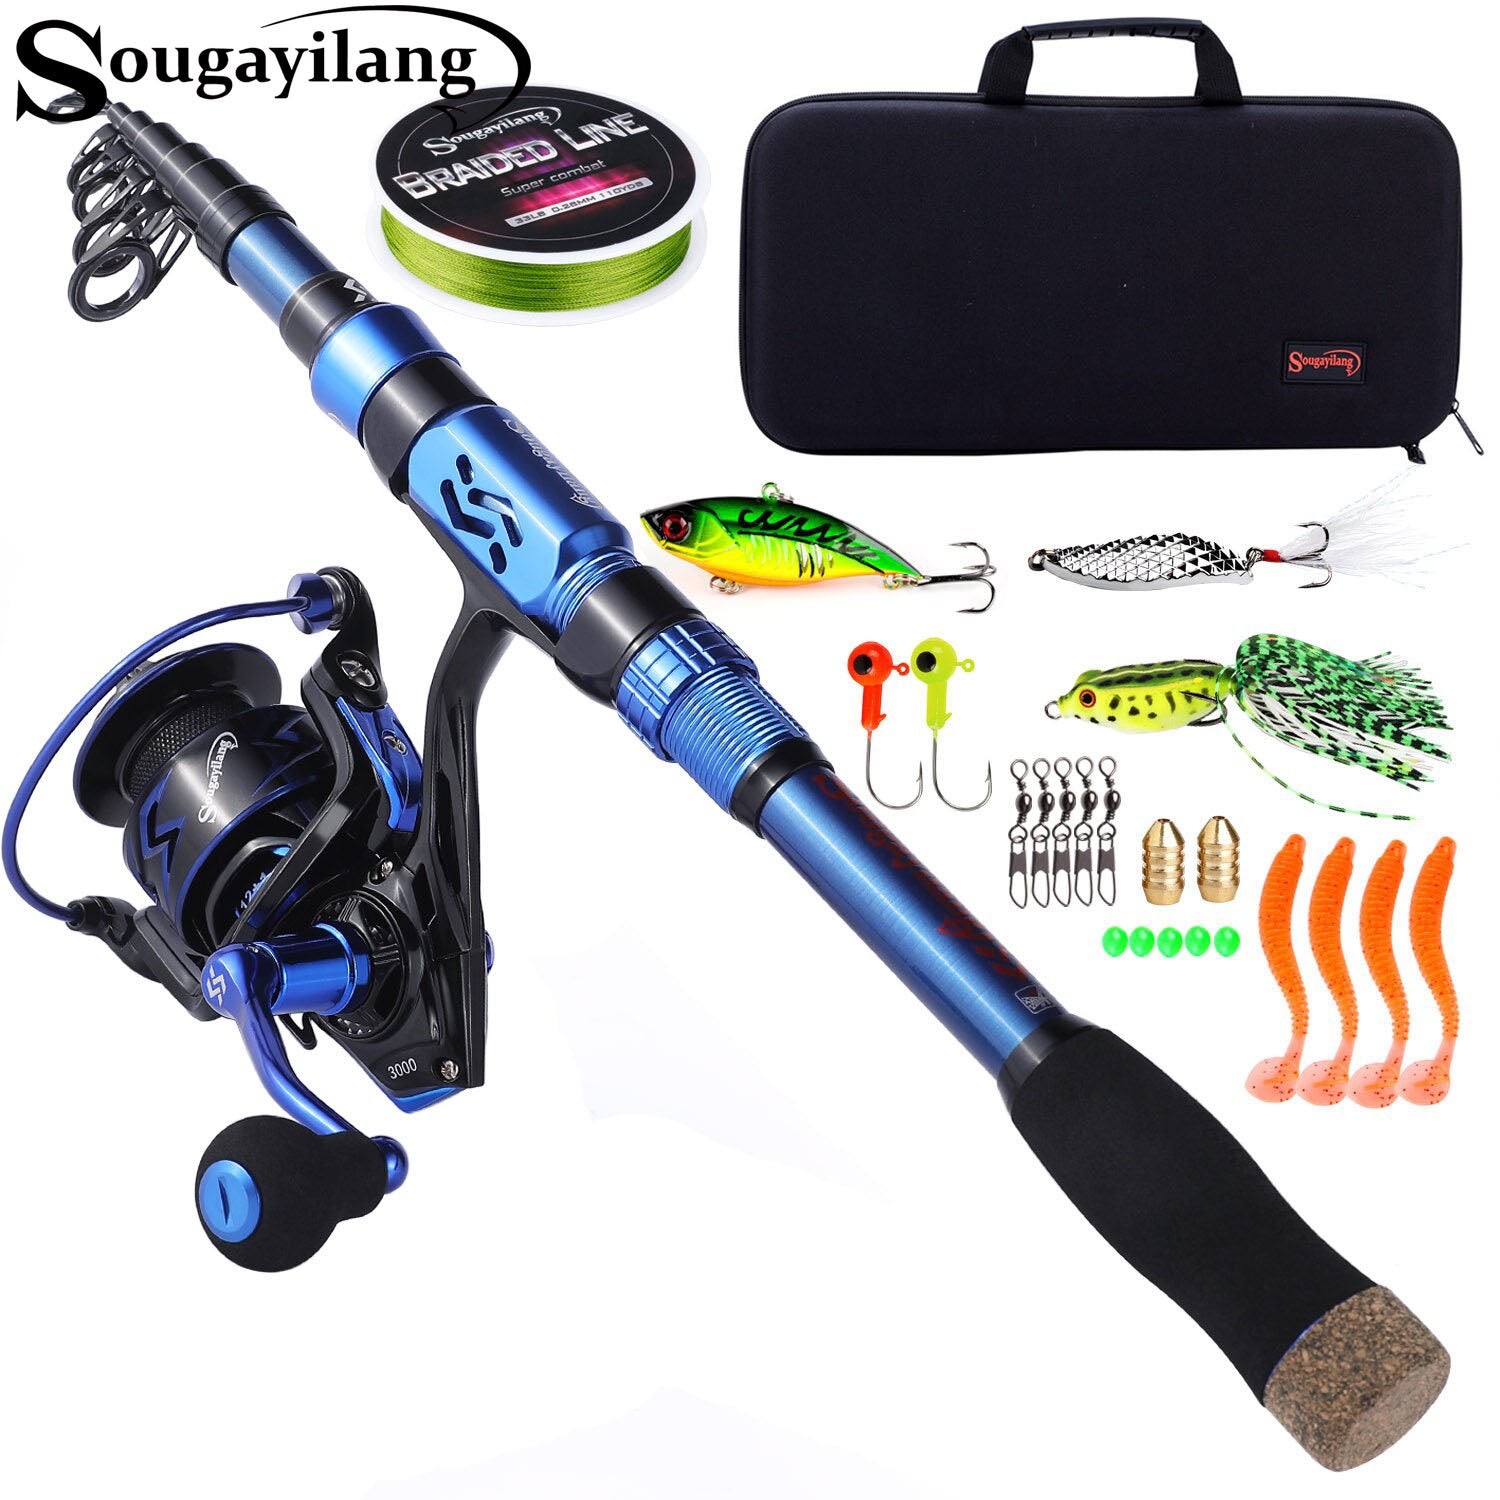 Sougayilang Top Quality 1.8-2.7M Carbon Fiber Telescopic Fishing Rod Combo  with Spinning Fishing Reel Line Bag Lures Full Set